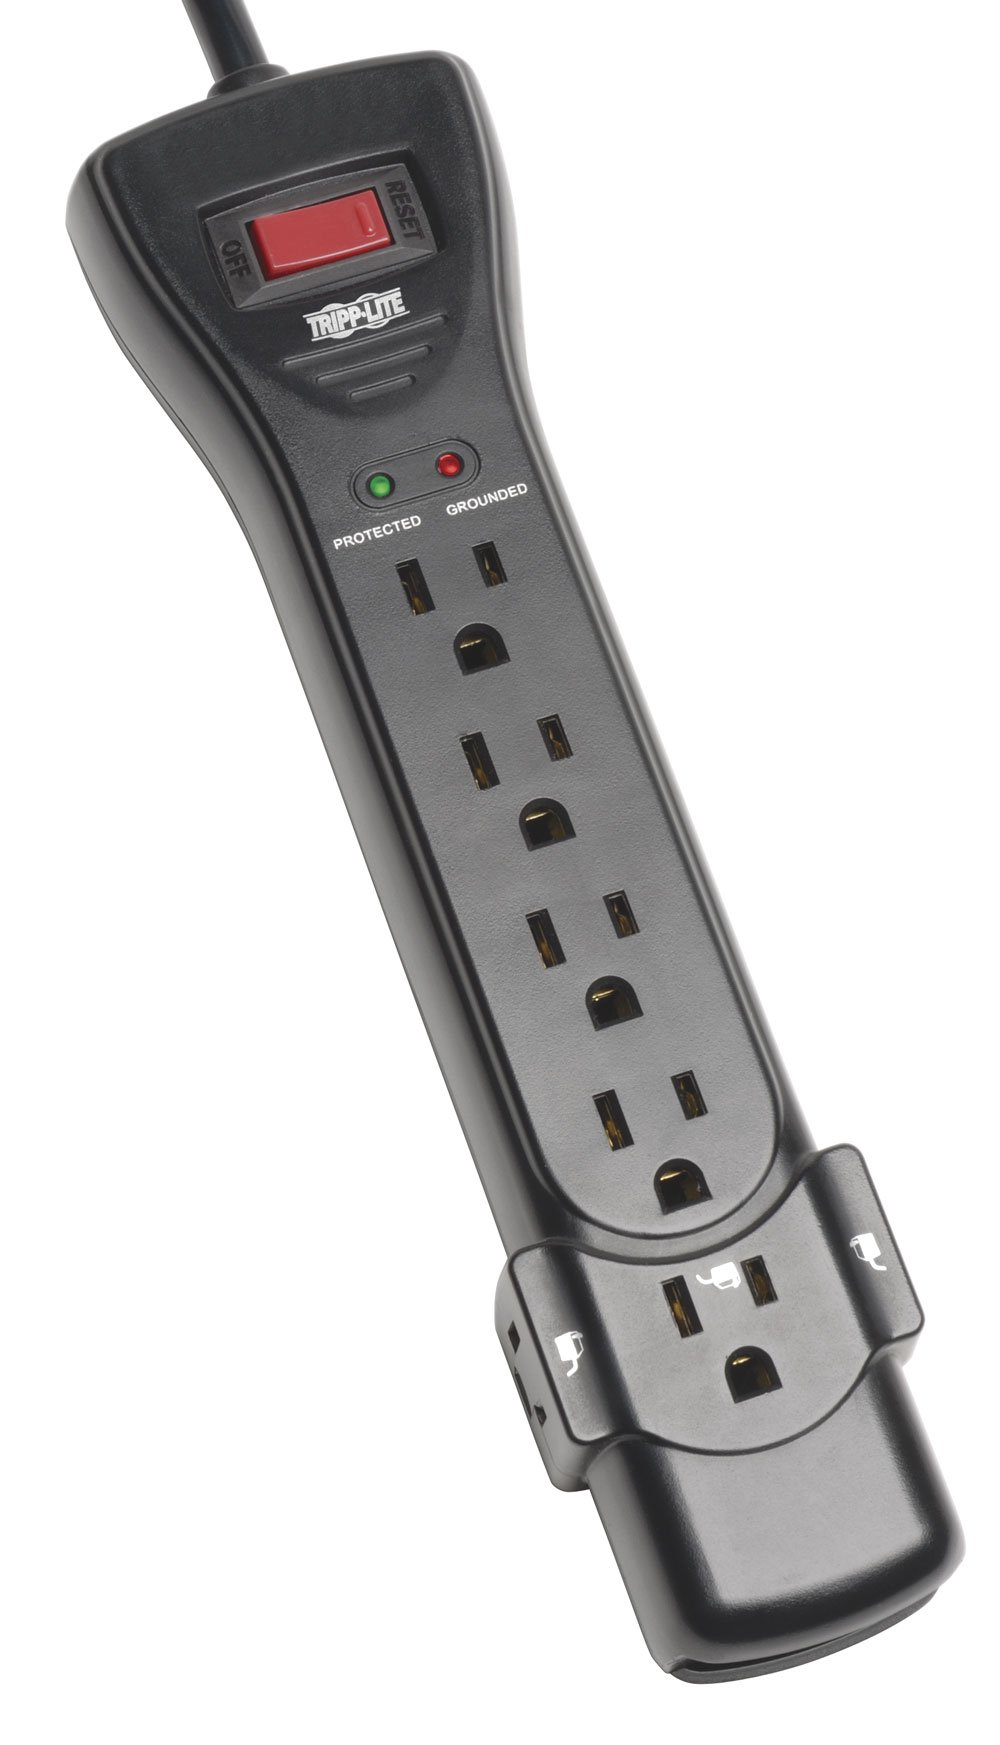 Tripp Lite SUPER7B 7 Outlet Surge Protector Power Strip, 7ft Cord, Right Angle Plug, 2160 Joules, Black, & Dollar 75,000 Insurance